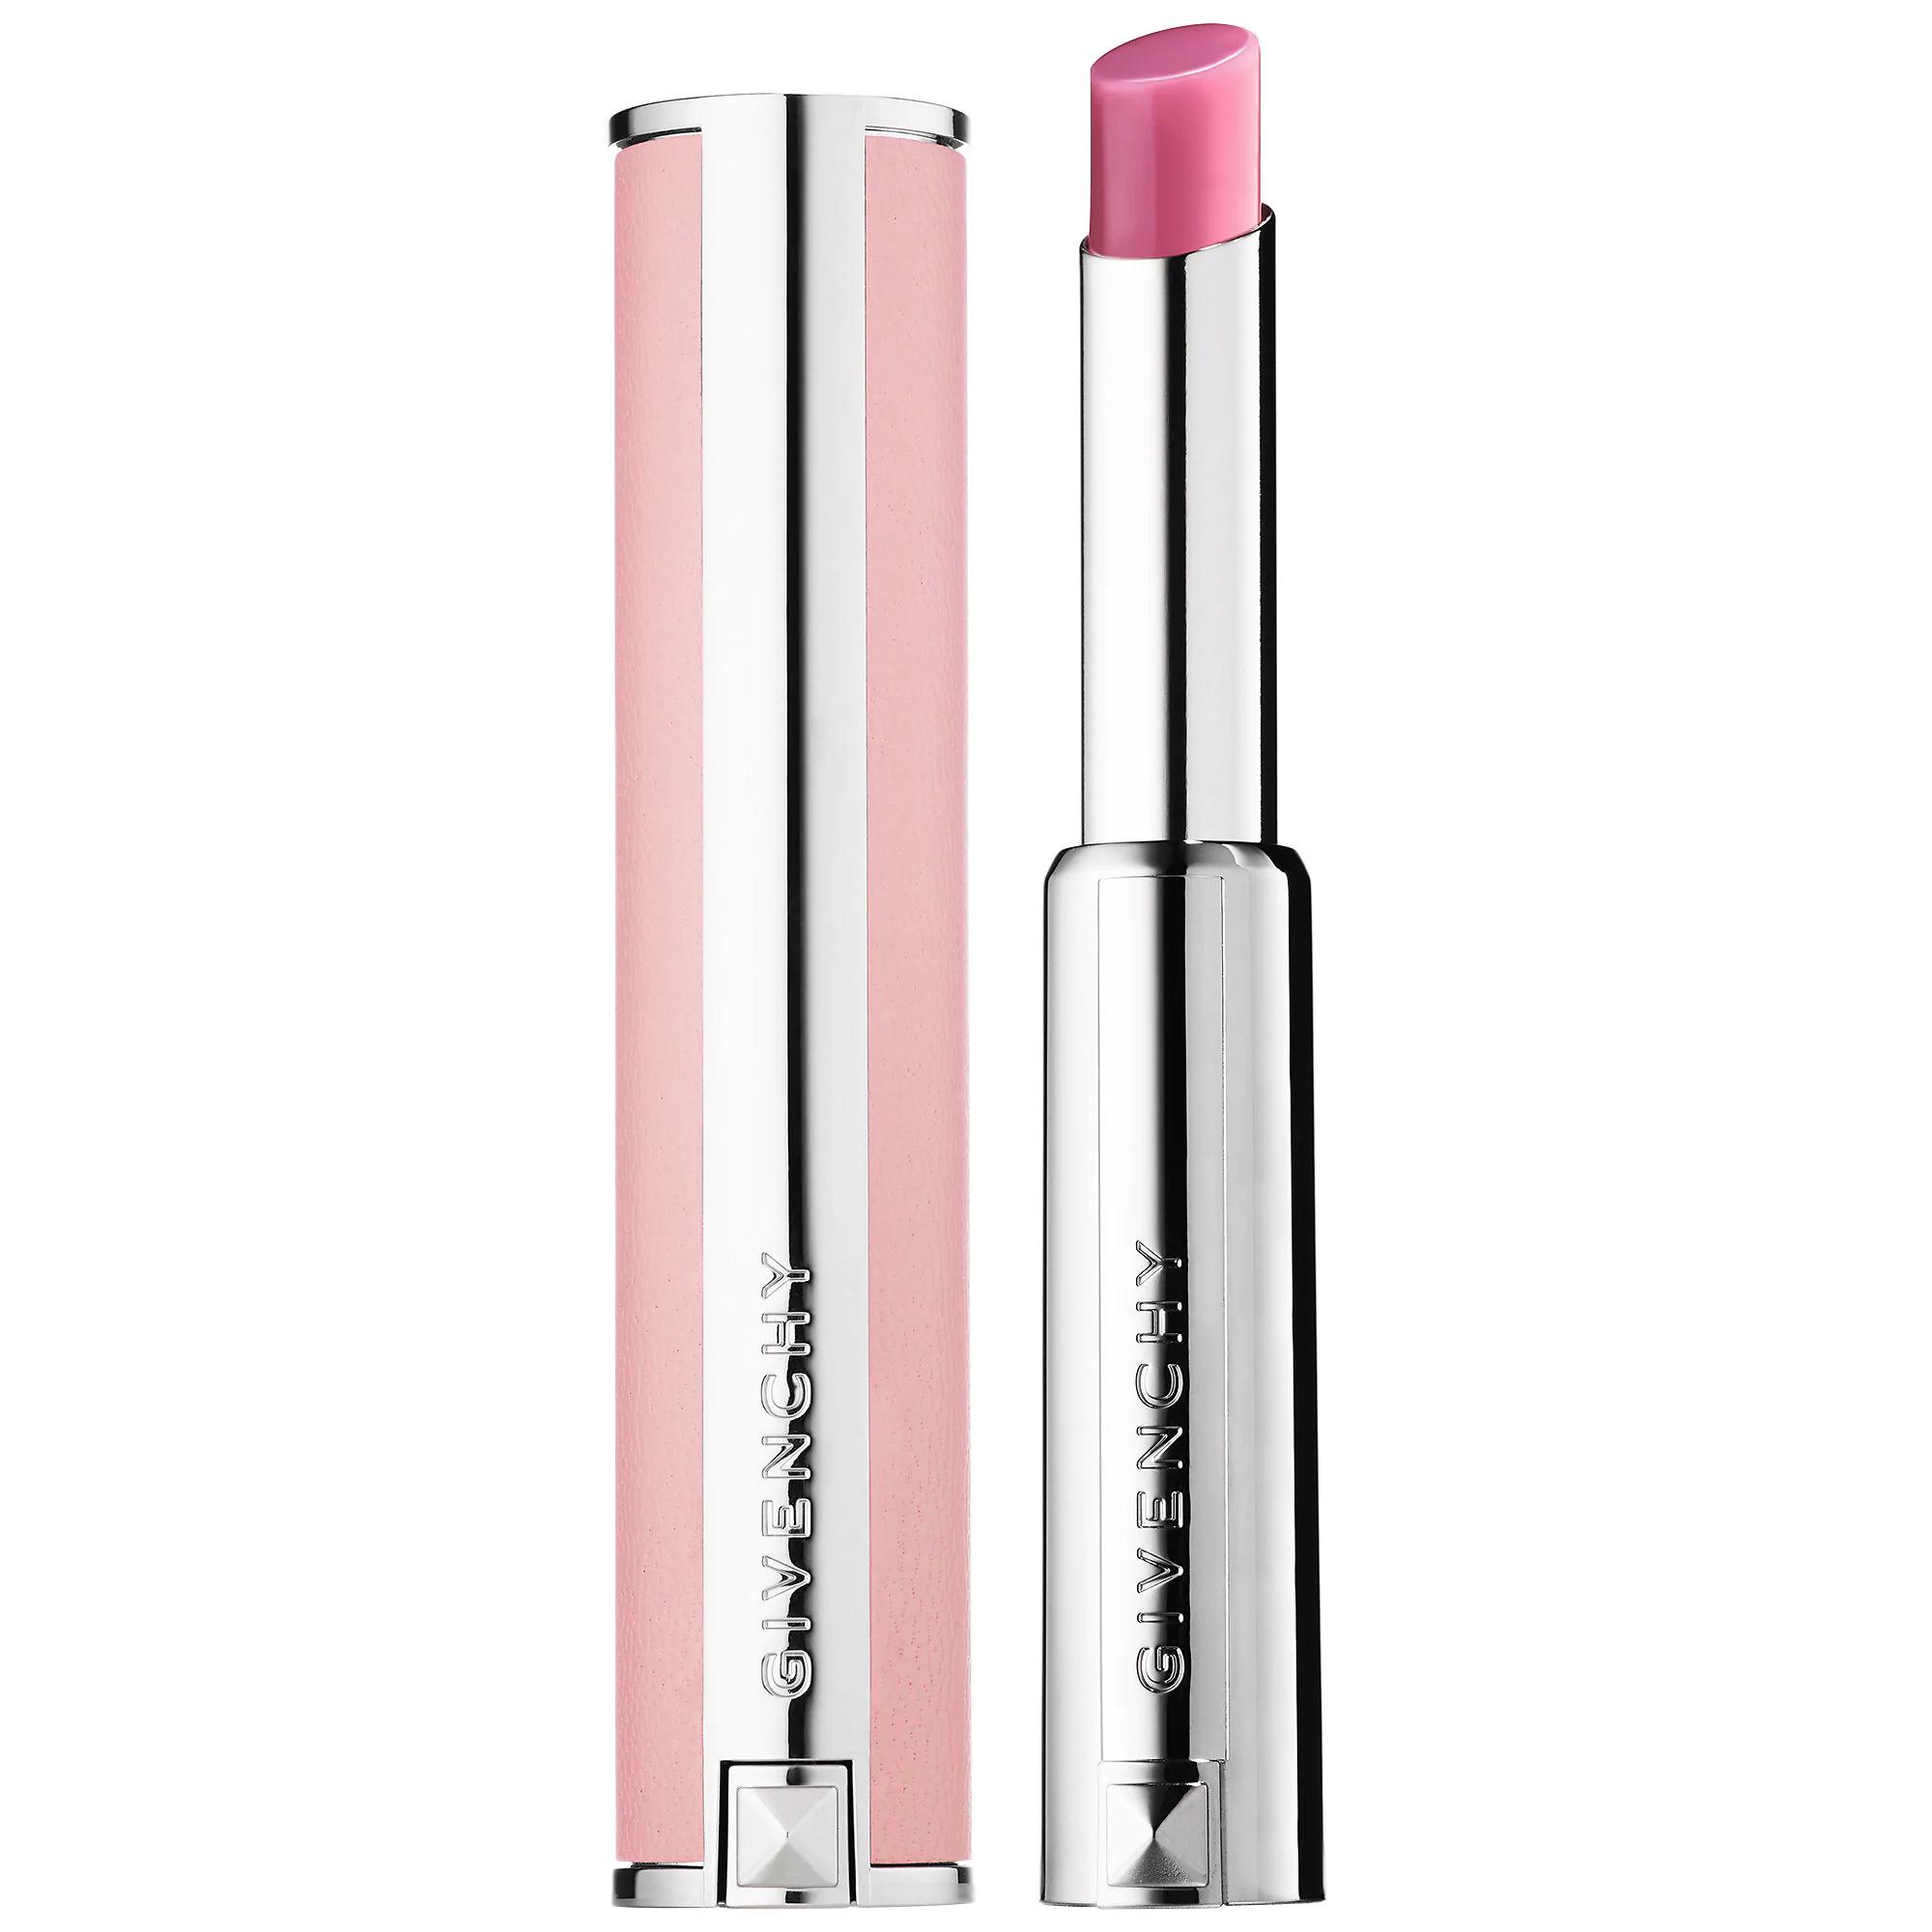 Givenchy Le Rouge Perfecto Beautifying Lip Balm Intense Pink 02